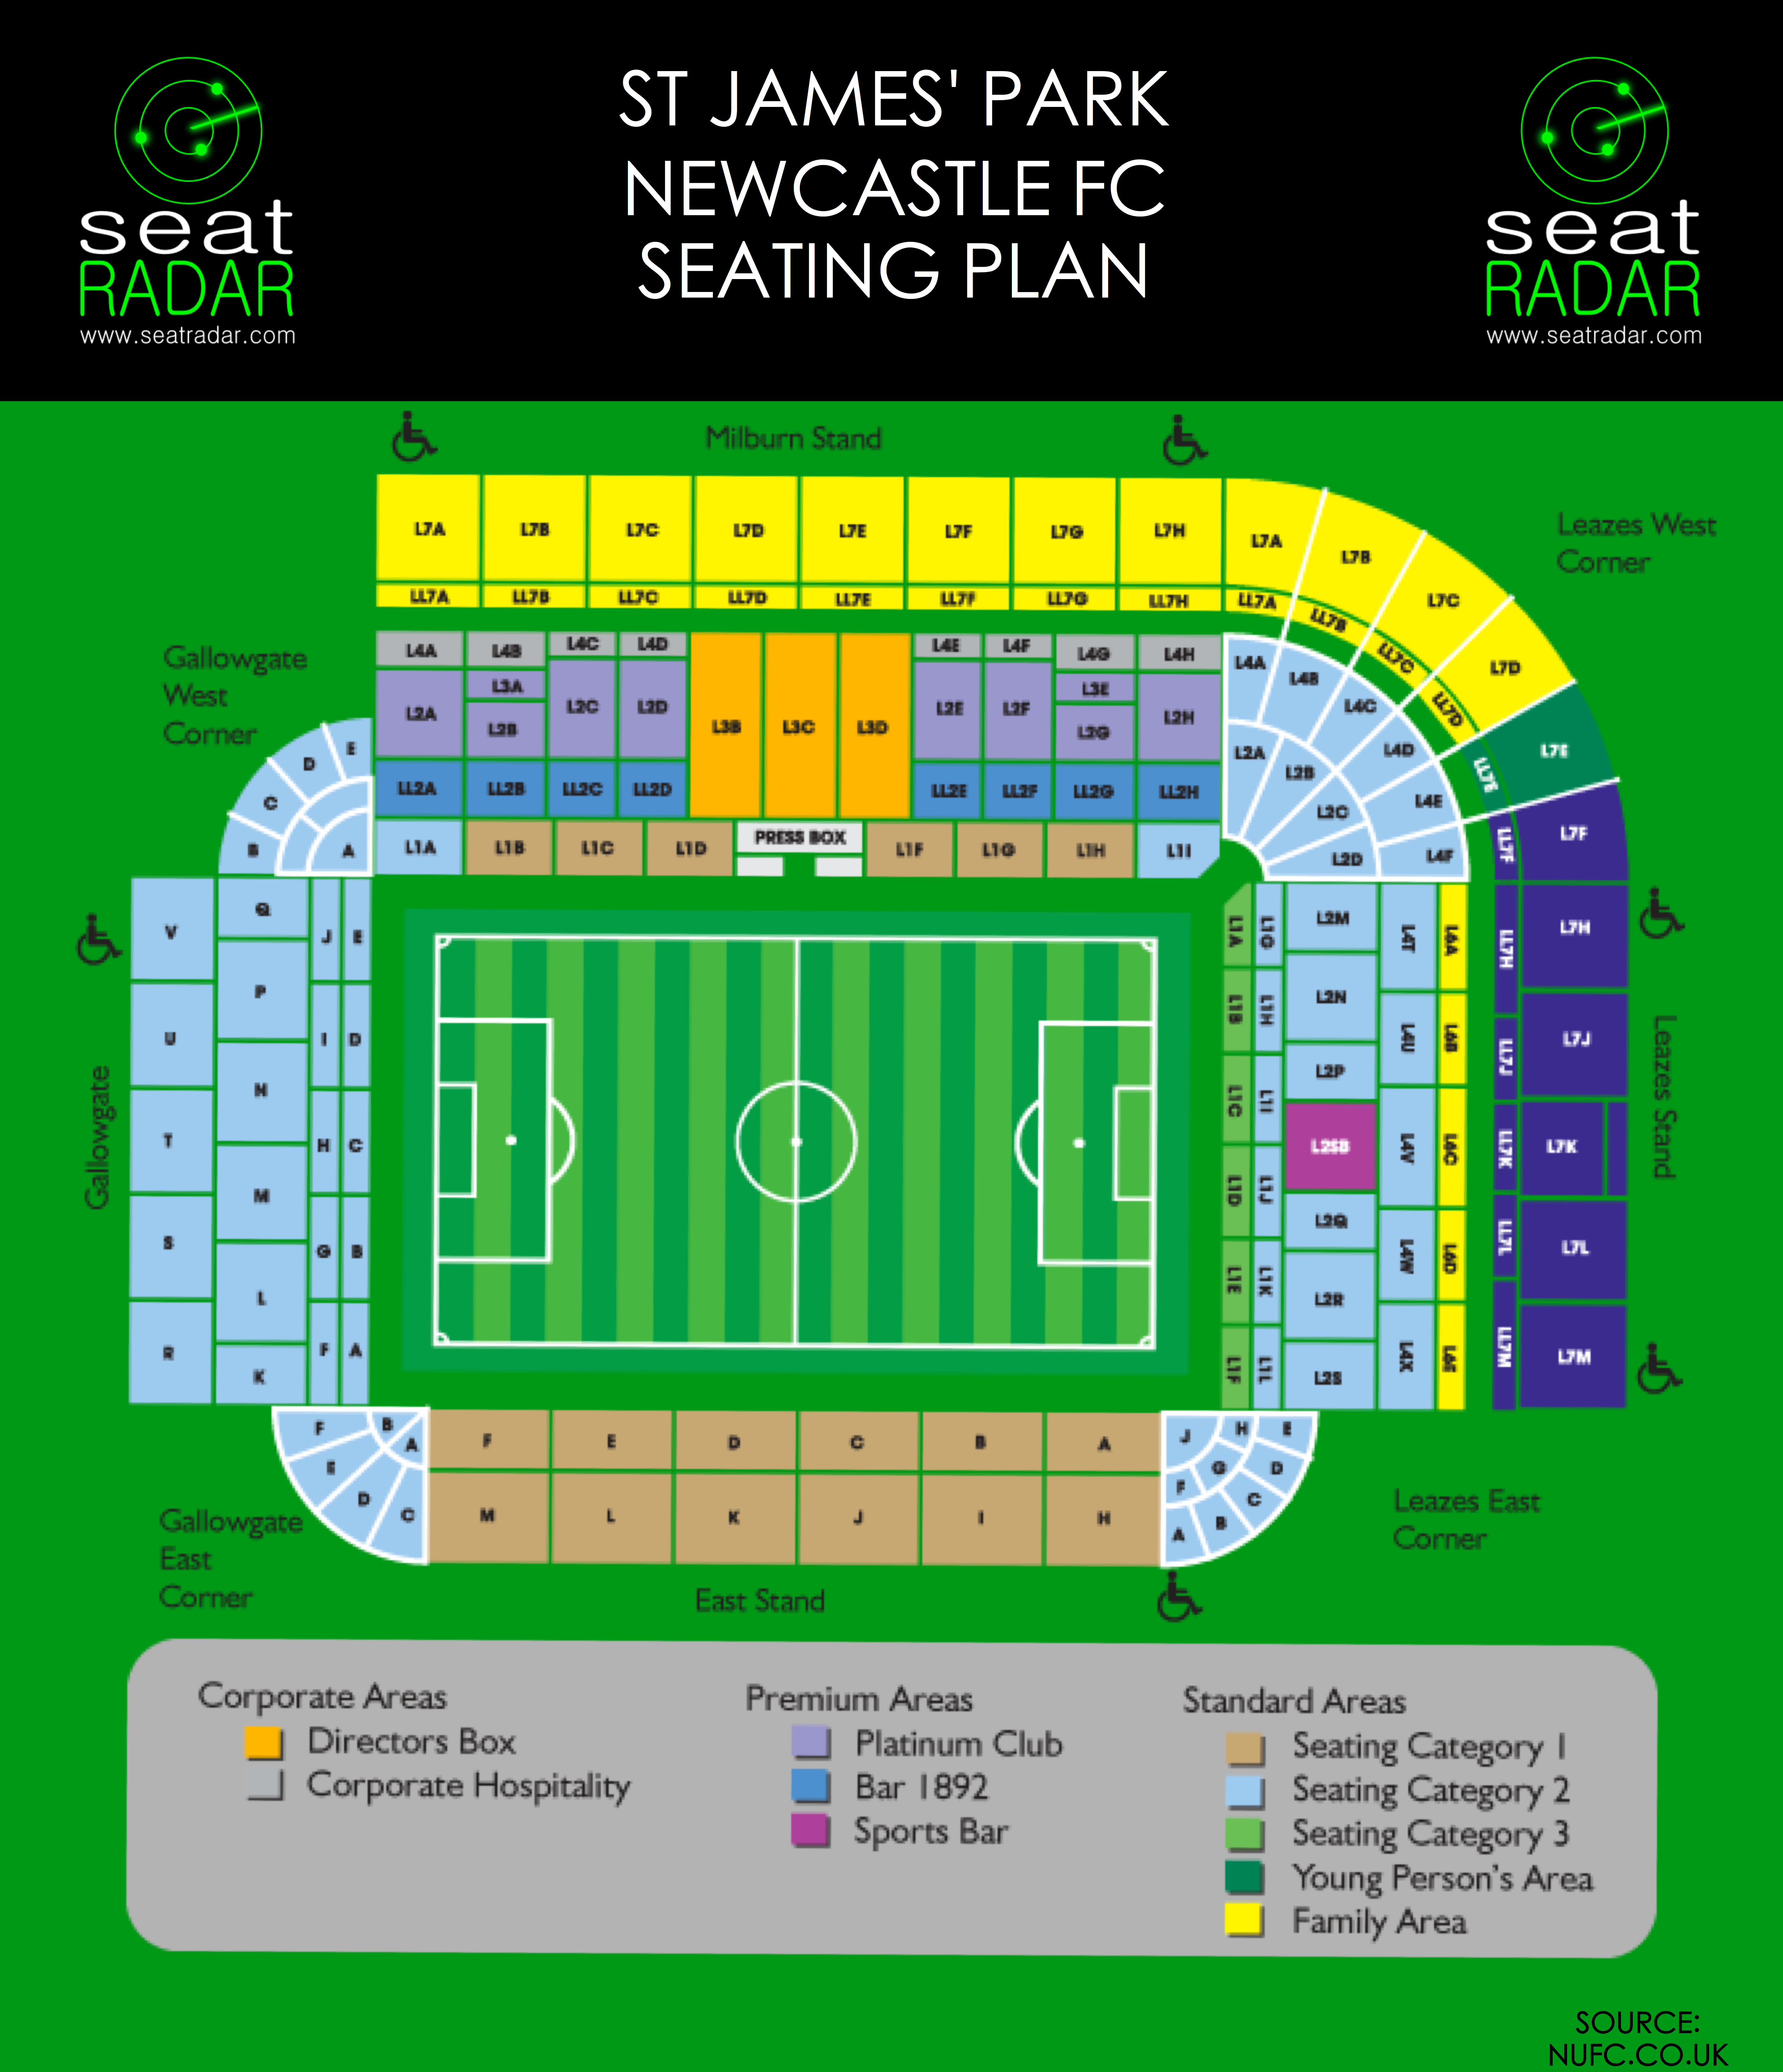 St James Park (Newcastle) Seating Plan (Temporary)